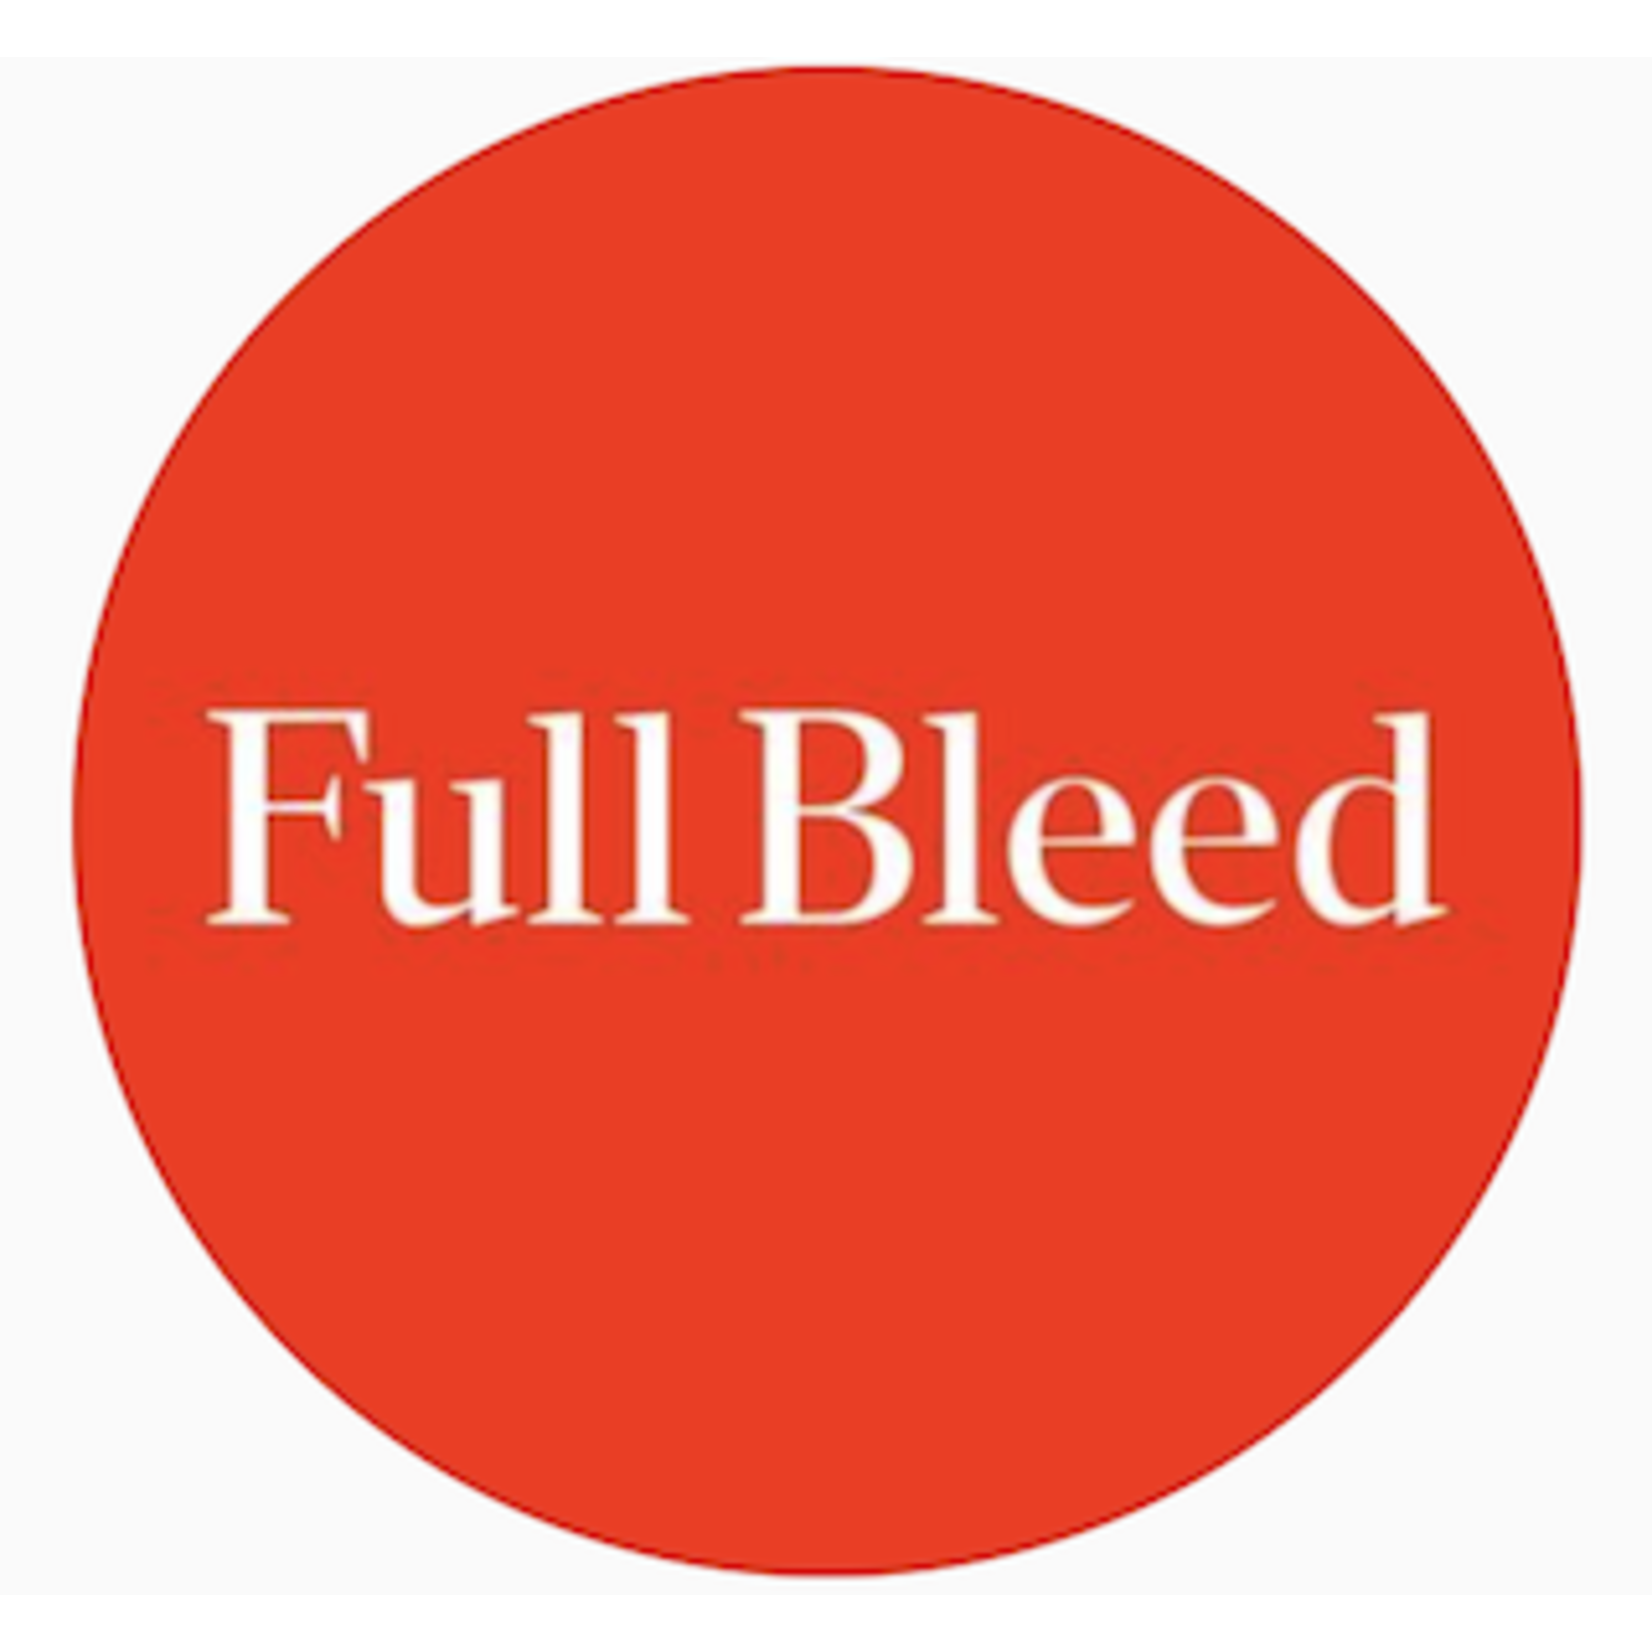 Full Bleed: The Materials Issue #6